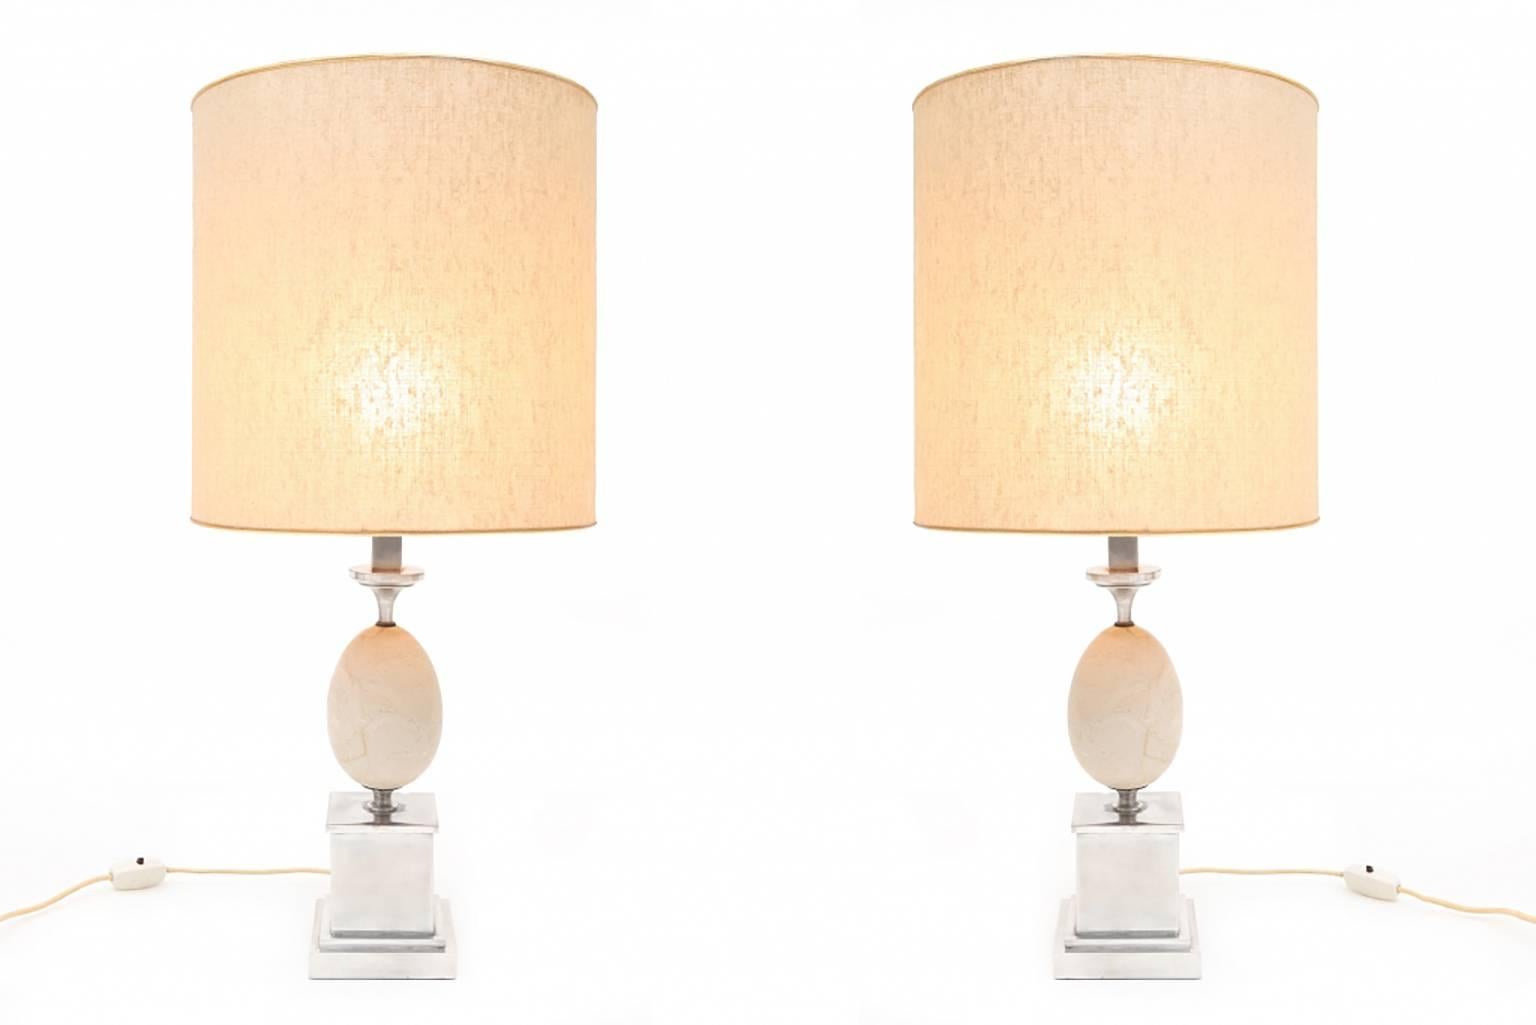 Travertine; Chrome; Lamps: Table lamp: Hollywood Regency; France; 1970's;

Hollywood Regency pair of travertine & chrome table lamps.

Check out our Goldwood storefront for more matching pieces.